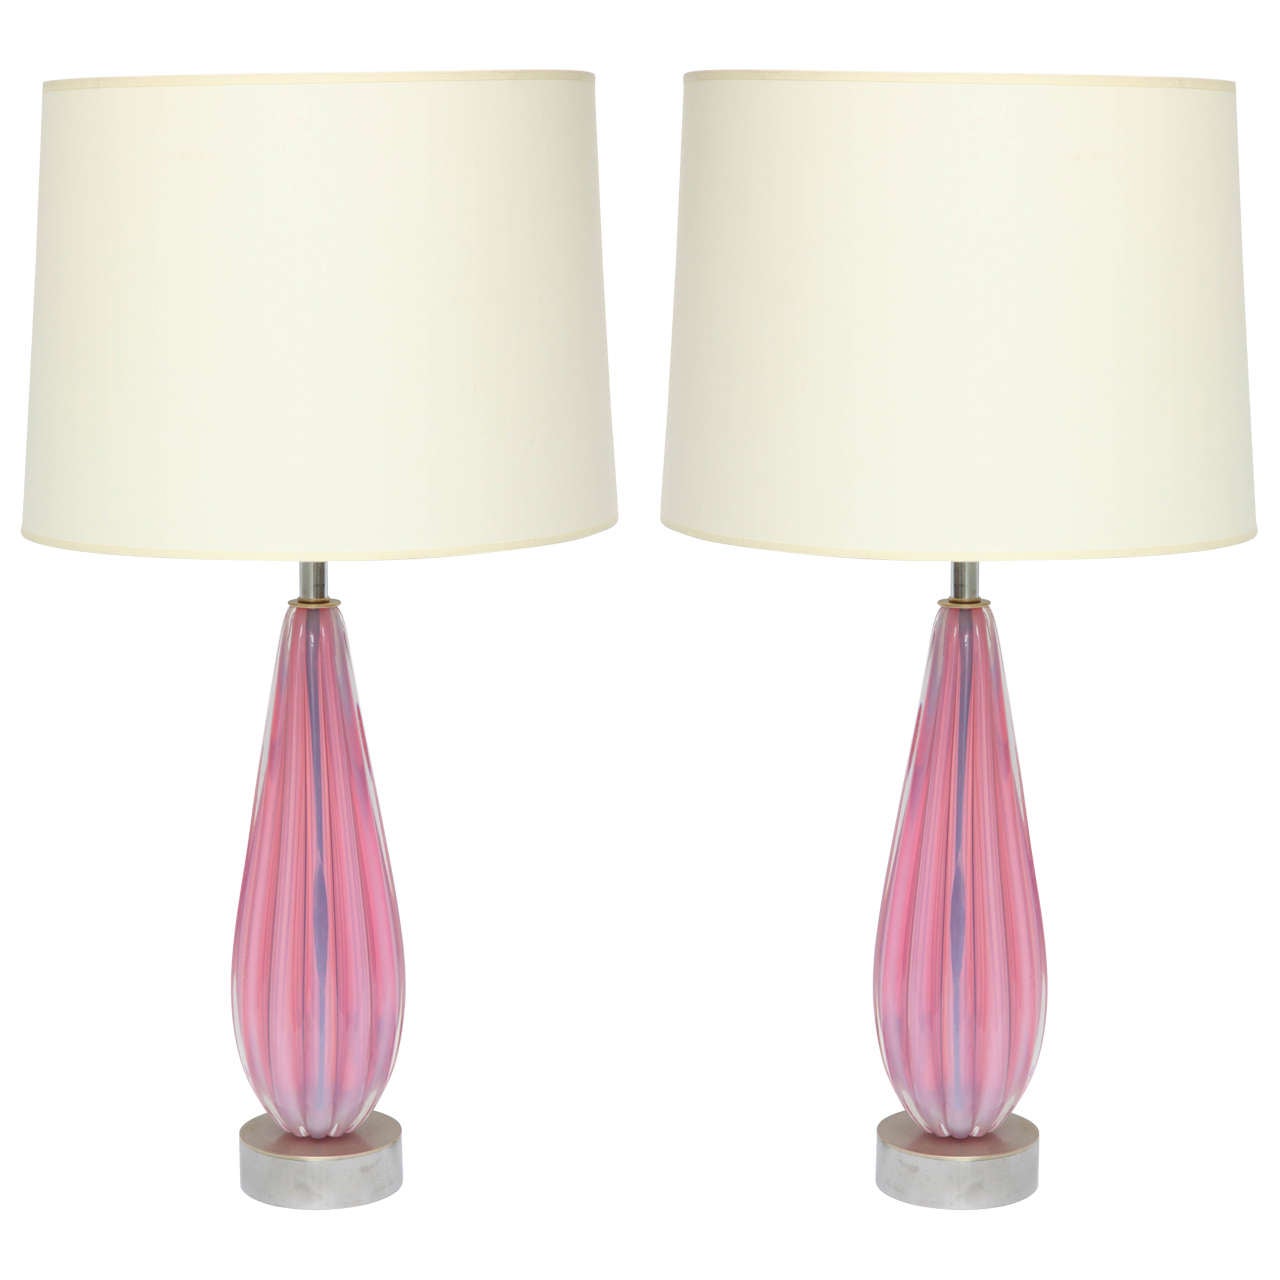 Pair of 1950s Italian Art Glass Table Lamps by Seguso